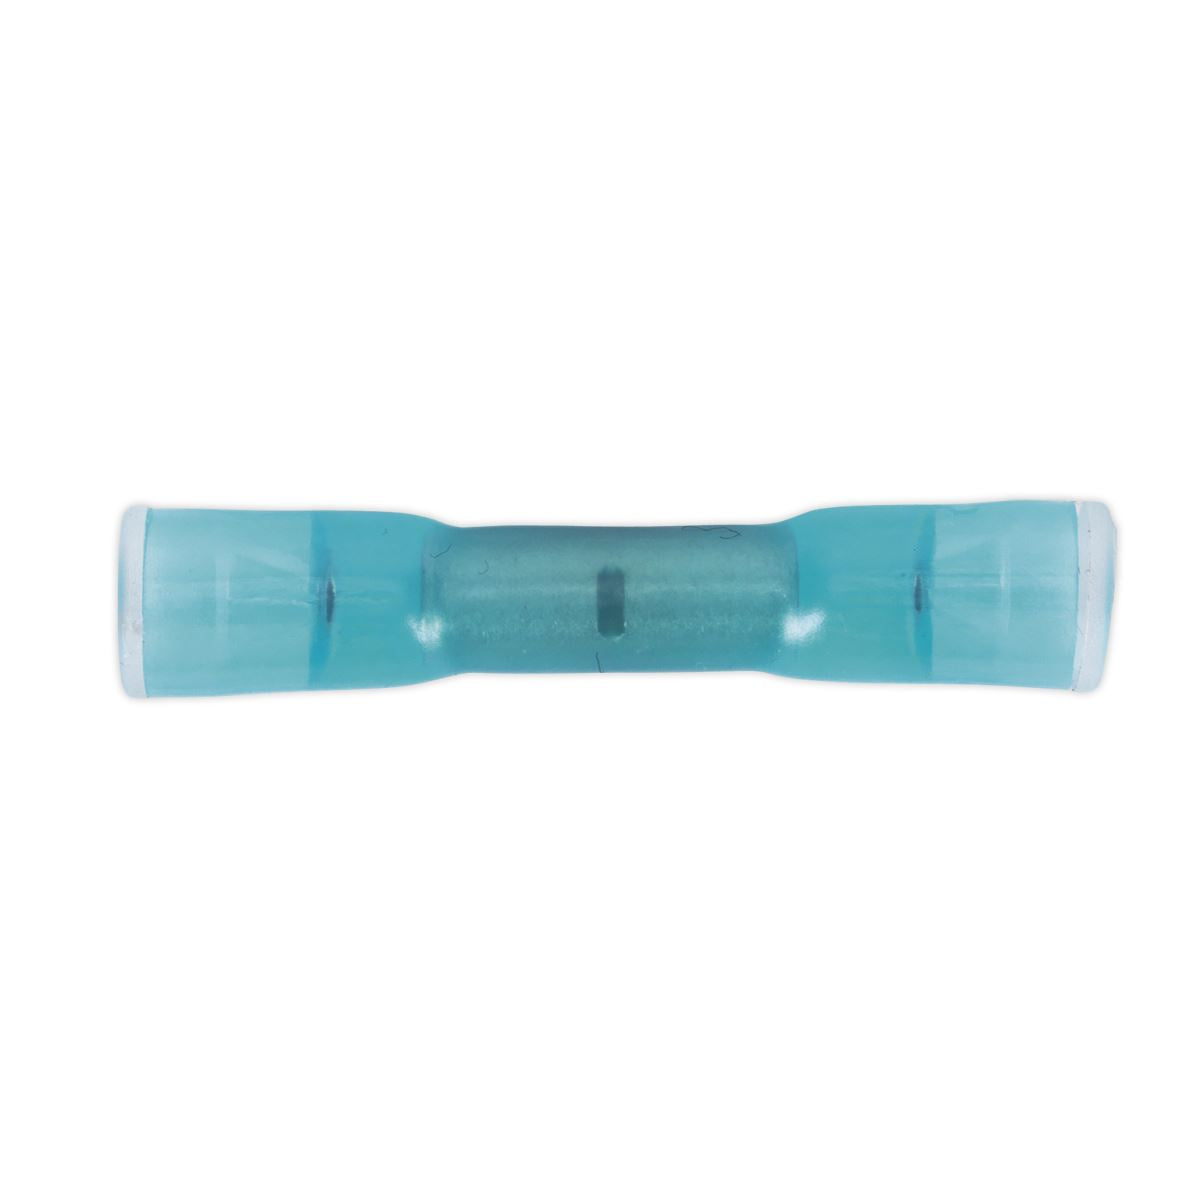 Sealey Cold Seal Butt Connector Blue Ø4.5mm Pack of 10